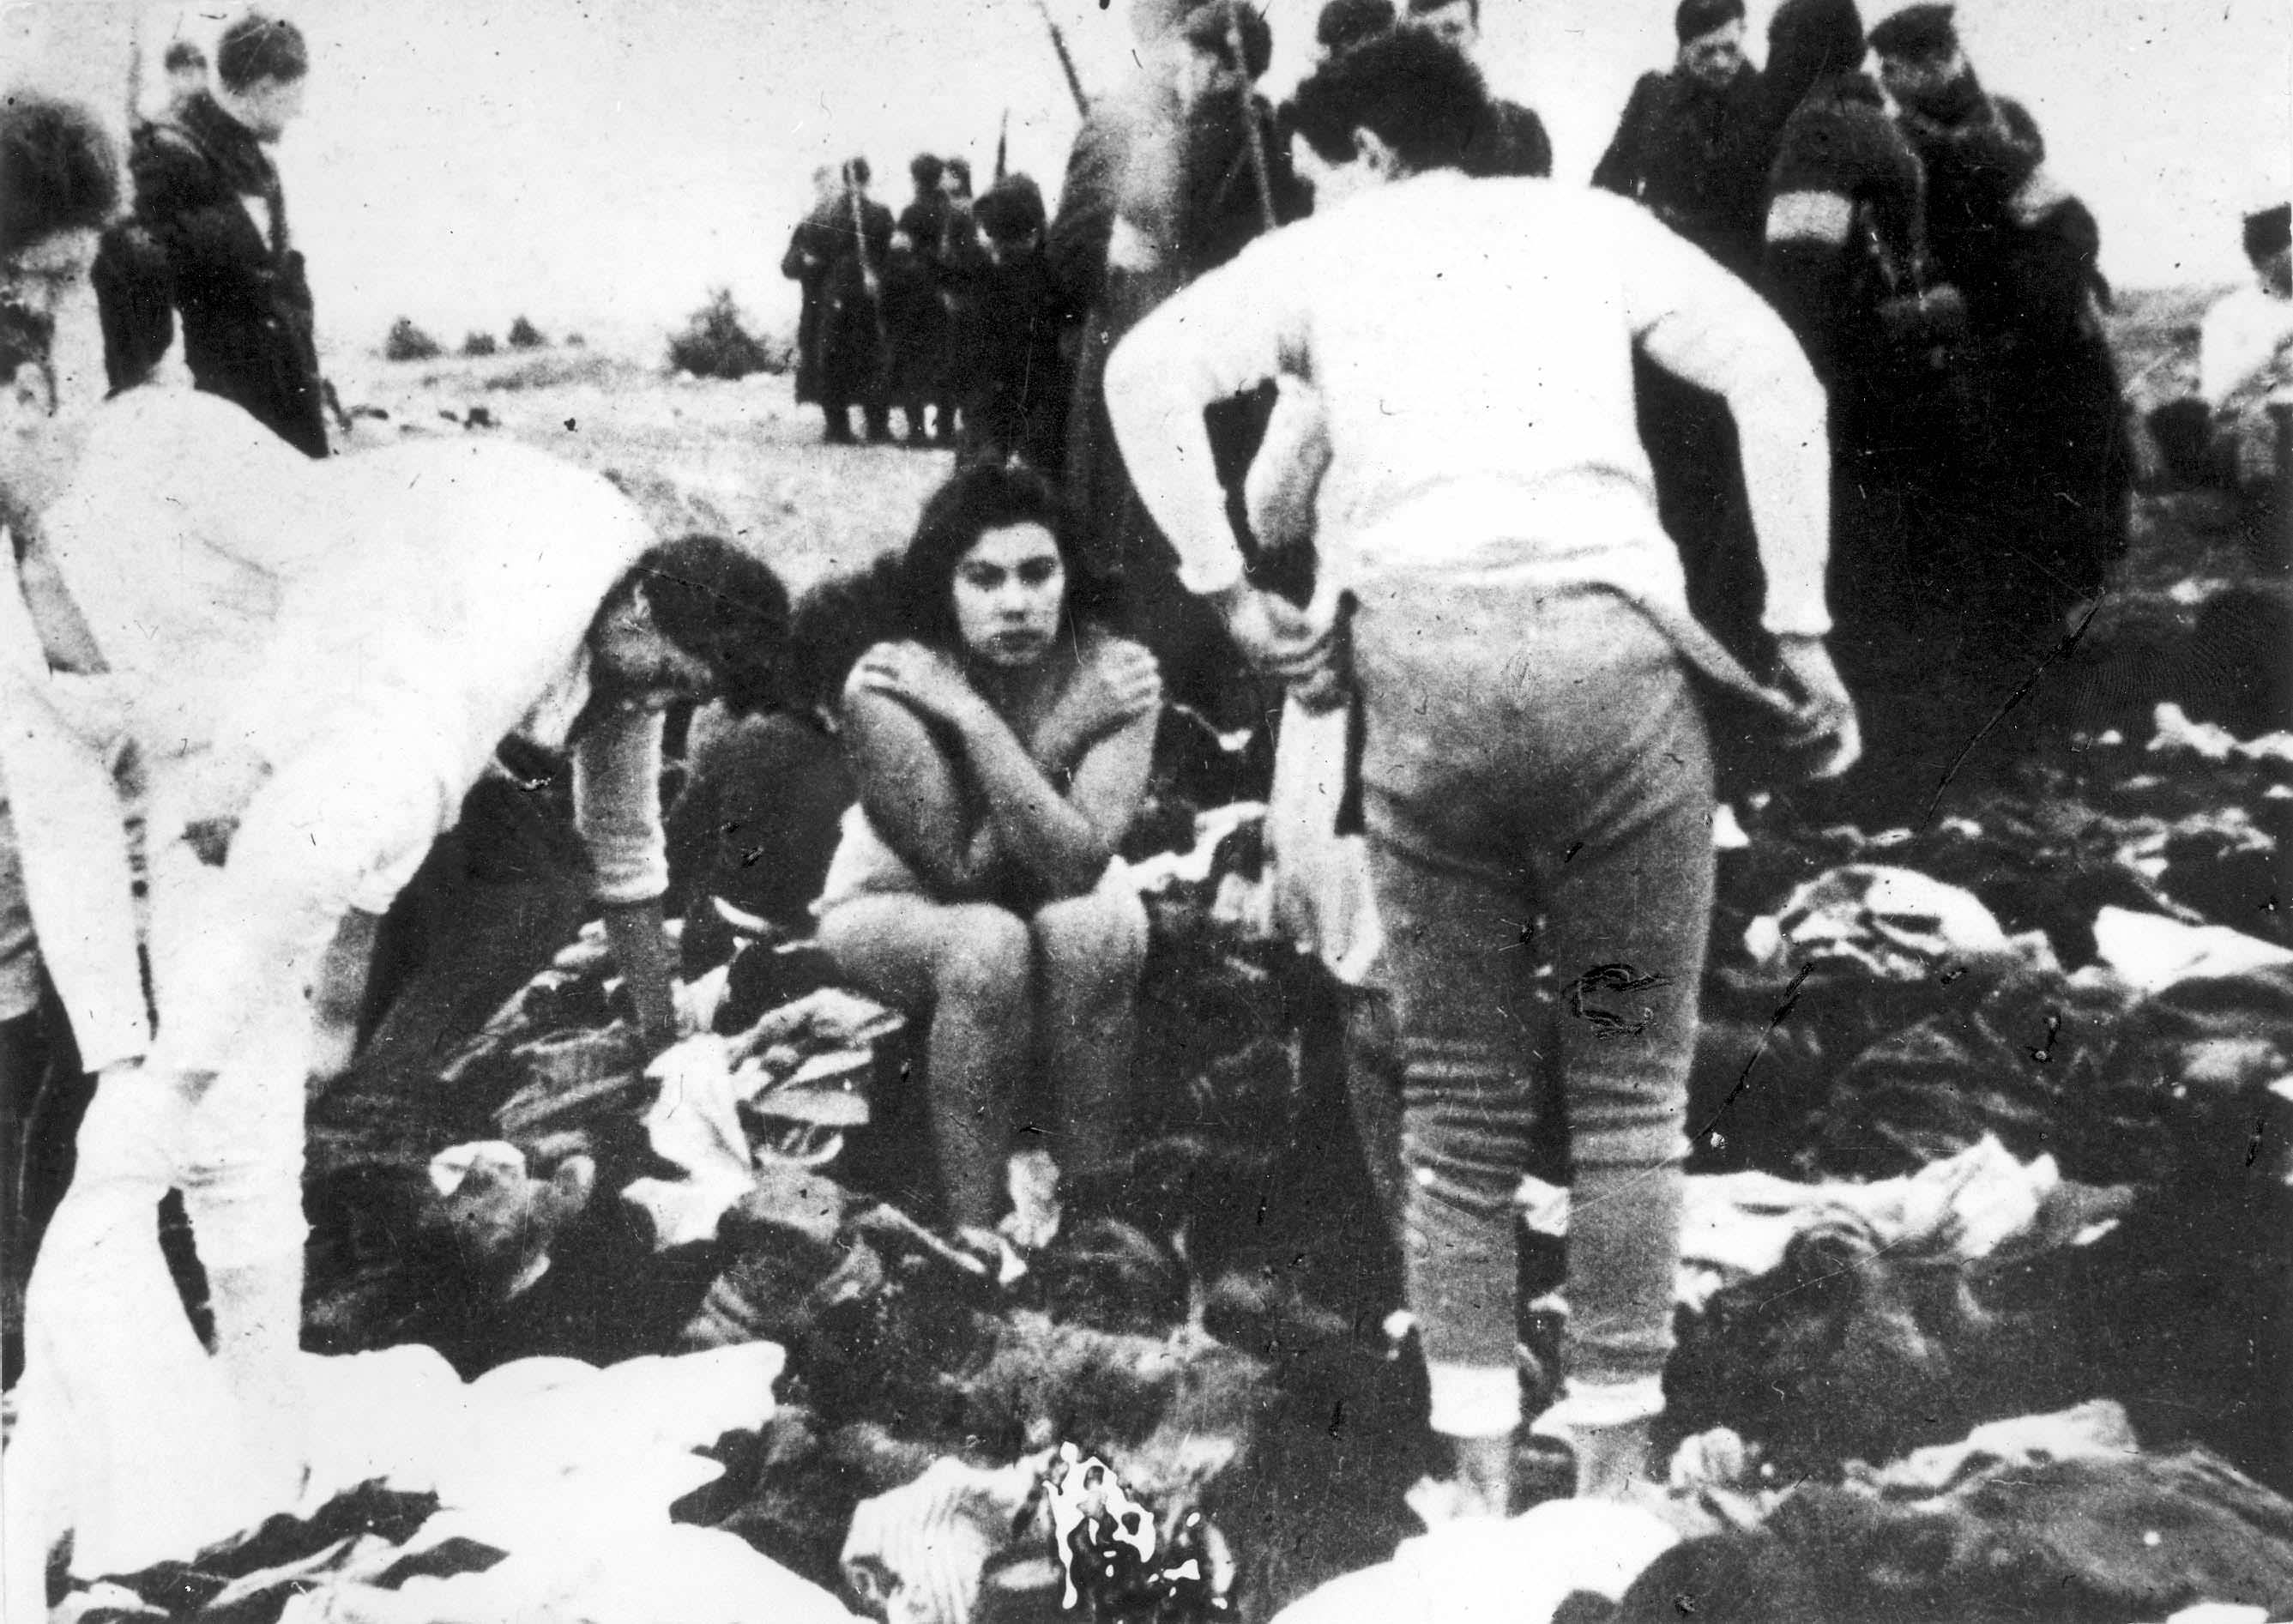 Continuing from the previous picture, a teenage girl sits frozen in fear as the other women around her strip their clothes off in Latvia in 1941. Moments later, the women would be led to a ditch nearby and shot. Everyone in this picture knew they were about to die. Nearly 3,000 Jews were killed in 3 days, almost all women and children. The SS orchestrated the executions rather than deportation. Throughout WWII, hundreds of thousands of Jews along with other undesirables such as gypsies, cripples, and special needs people were shot rather than gassed, especially early in the war as countries fell to the Third Reich. Part of the reason they would move to the Final Solution and have Jews and others gassed instead was not only because it was faster and far more efficient, but it was also less traumatic to their soldiers. Many soldiers, even SS divisions, proved they still had part of their humanity as they were having a lot of trouble shooting women and children.